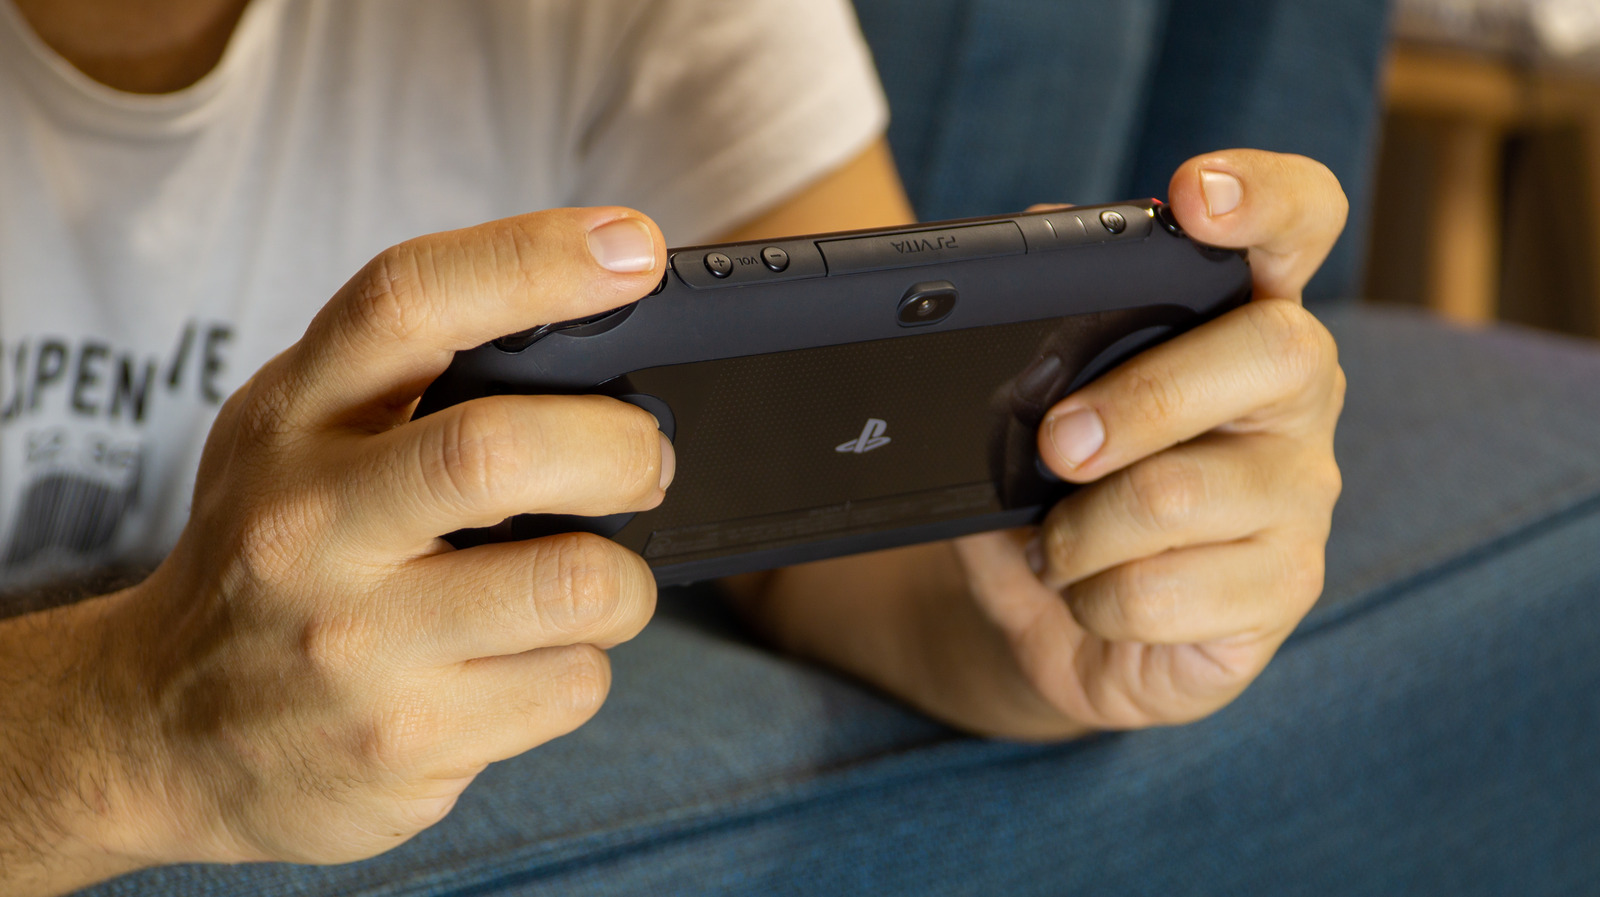 Sony's Next Gaming Handheld May Not Be The Vita 2 Fans Want